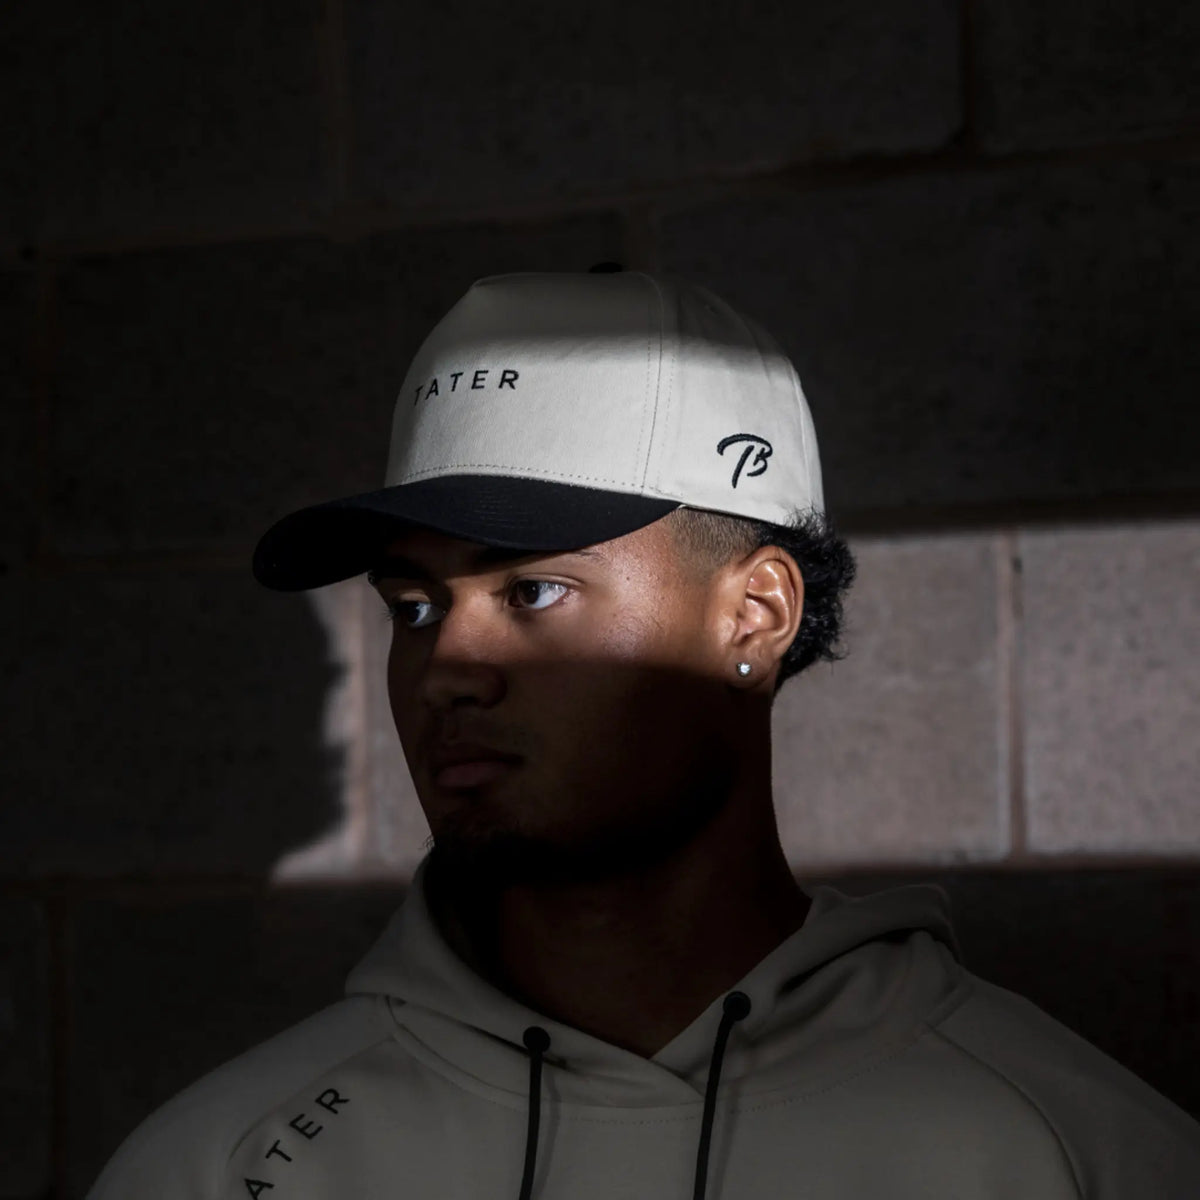 The image features a person wearing a tan snapback hat with the word &quot;TATER&quot; on the front and the Tater Baseball &quot;TB&quot; logo on the side, paired with a hoodie that also carries the &quot;TATER&quot; branding. The overall look suggests a coordinated athletic style, with the person looking off to the side, creating a contemplative and focused atmosphere. The lighting in the photo highlights the hat and the person&#39;s profile, adding to the moody and professional aesthetic of the apparel.